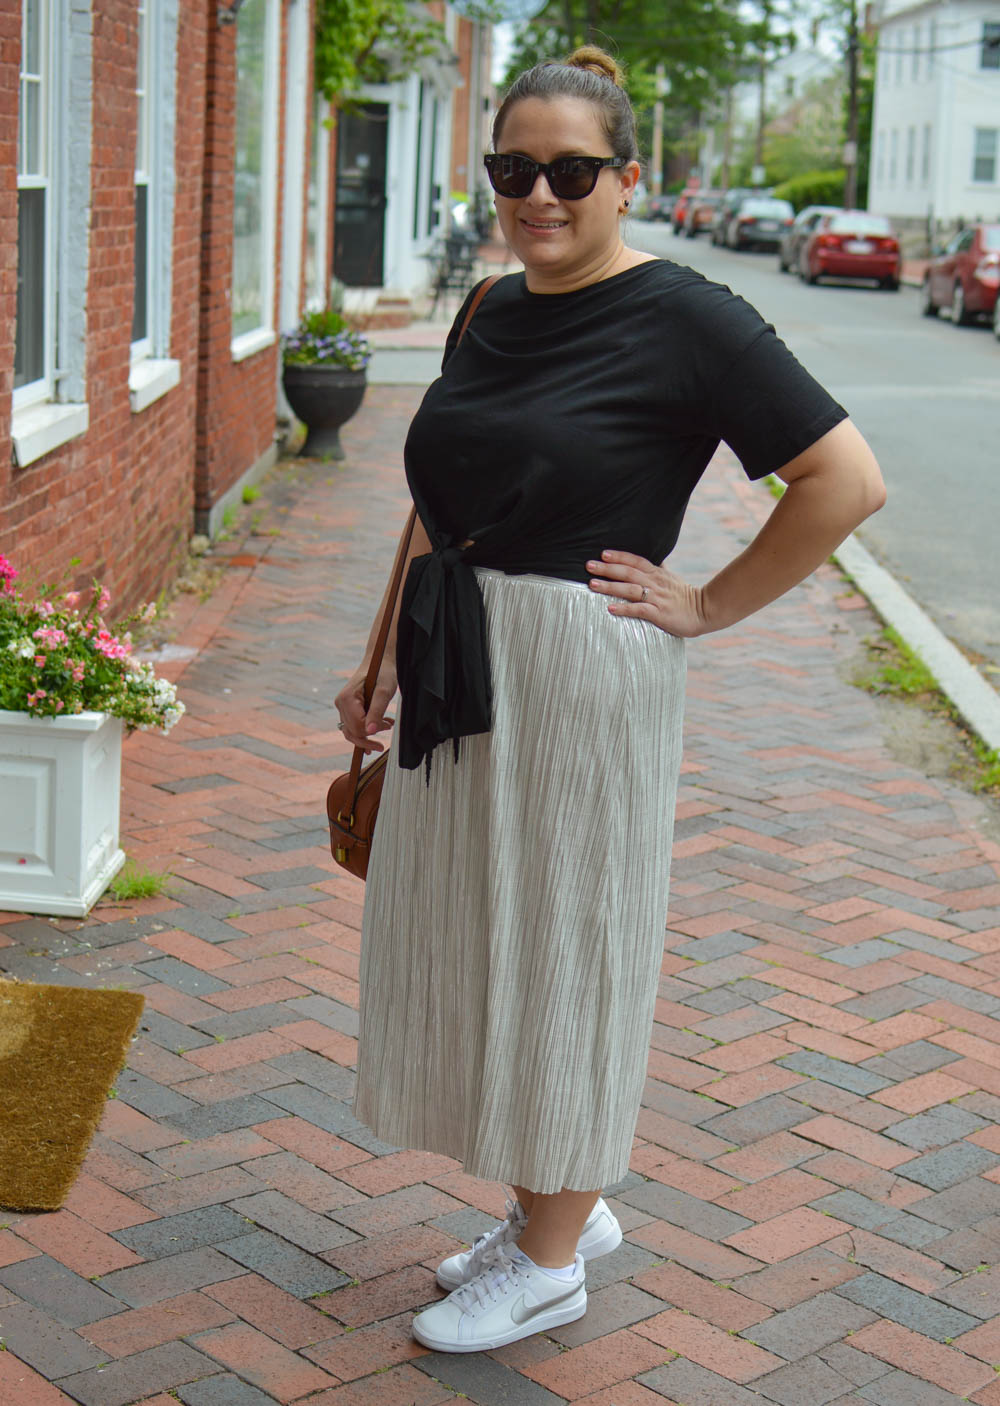 How to style a metallic skirt